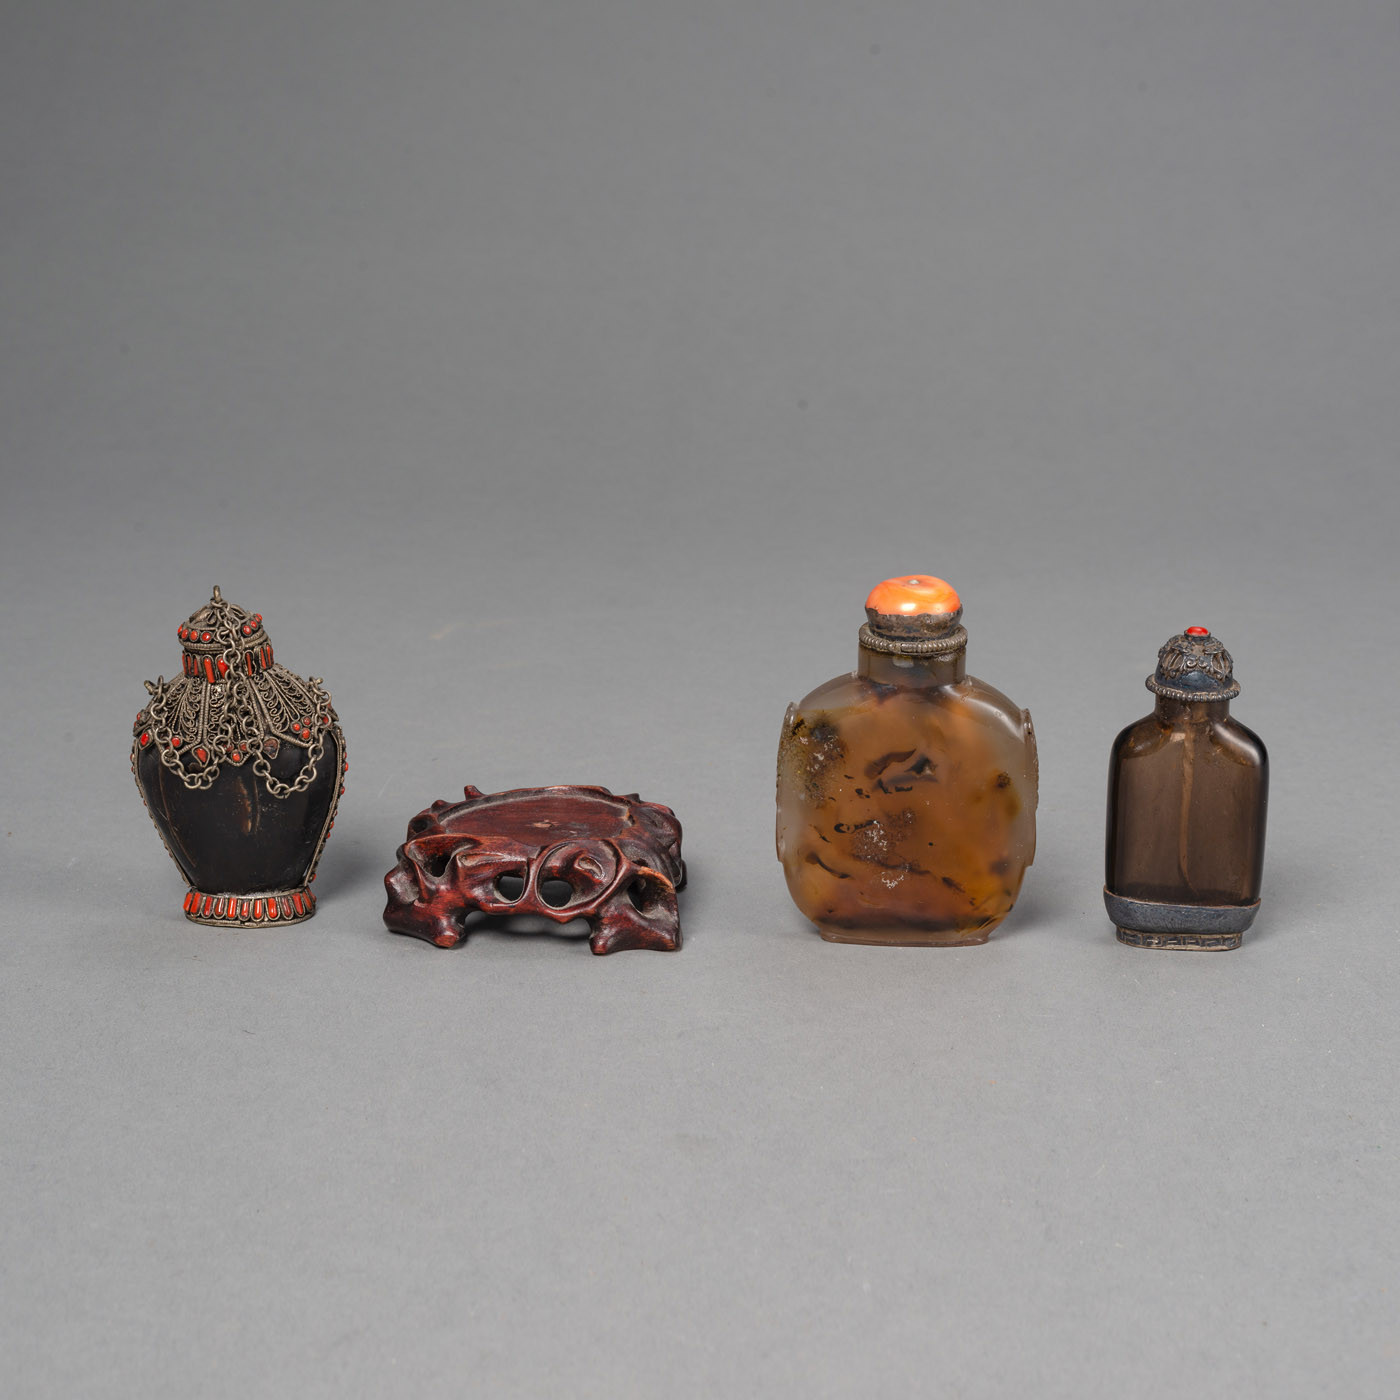 <b>THREE SNUFF BOTTLES, PARTLY METAL-FITTED, OF AGATE, WITH CORAL-INLAID STOPPERS AND FITTINGS, AND A WOOD STAND</b>